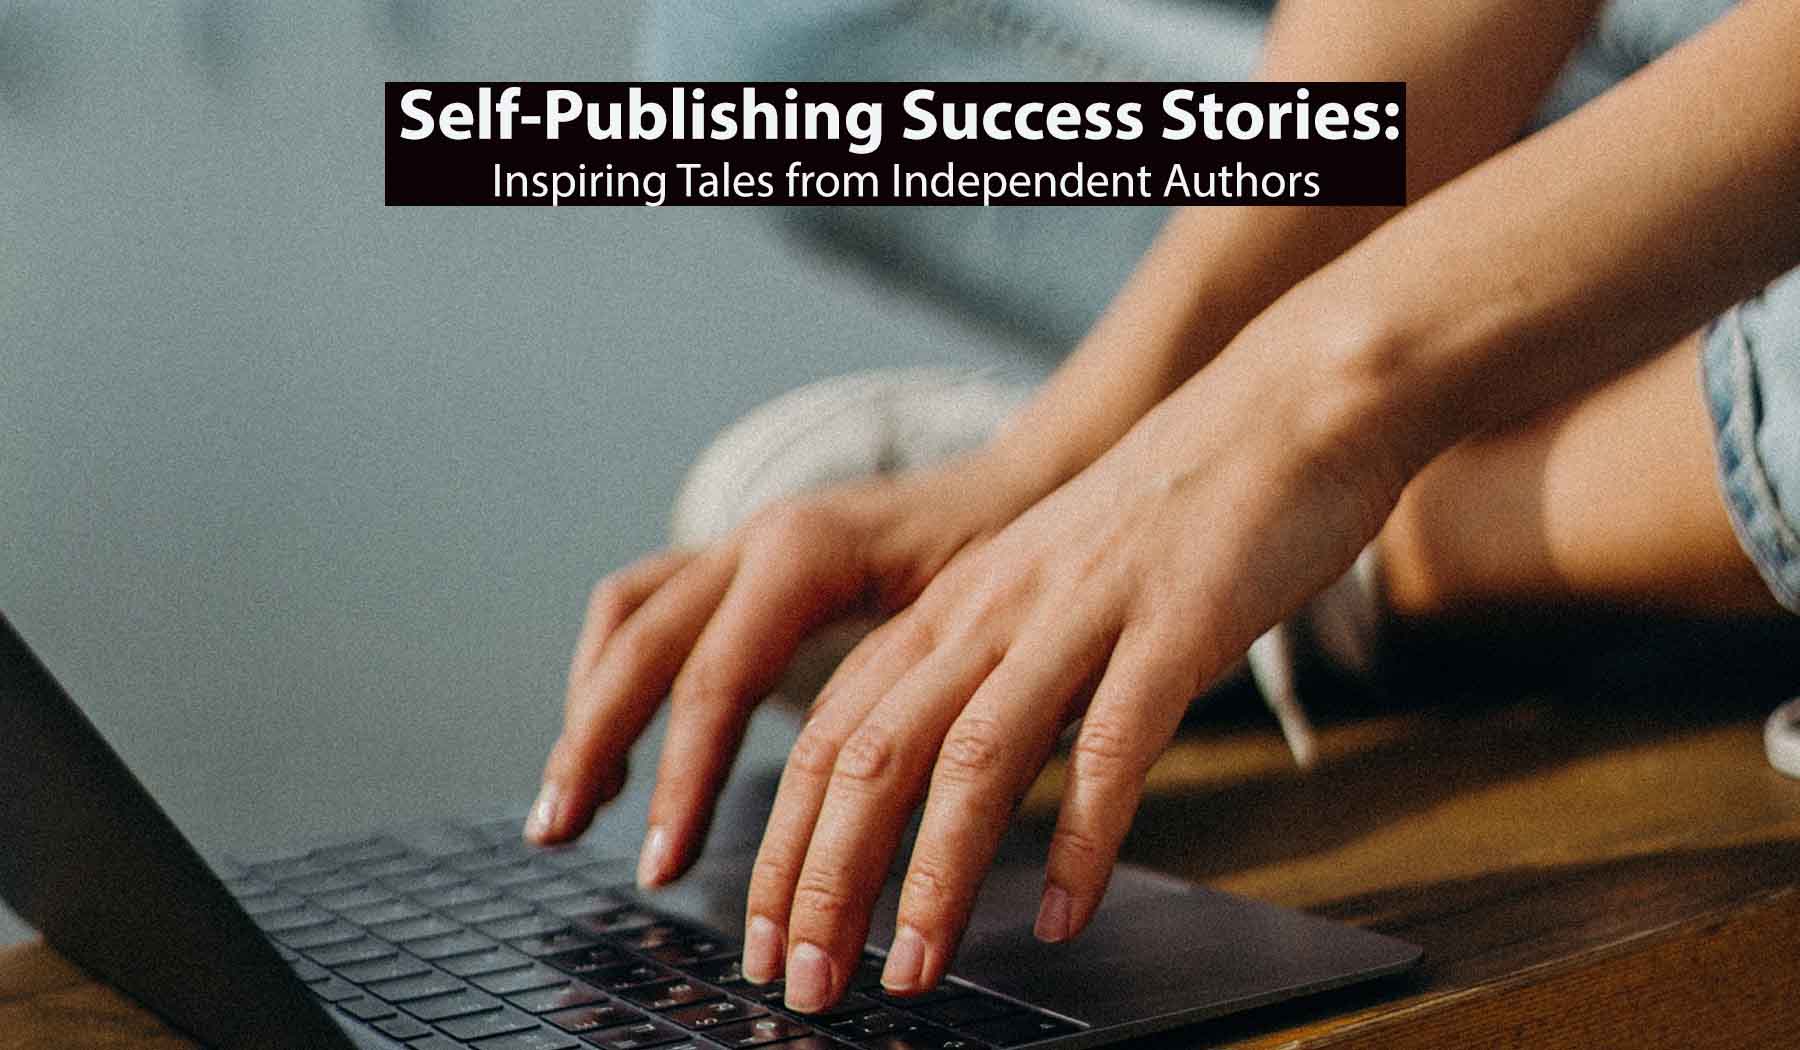 Self-Publishing Success Stories Inspiring Tales from Independent Authors